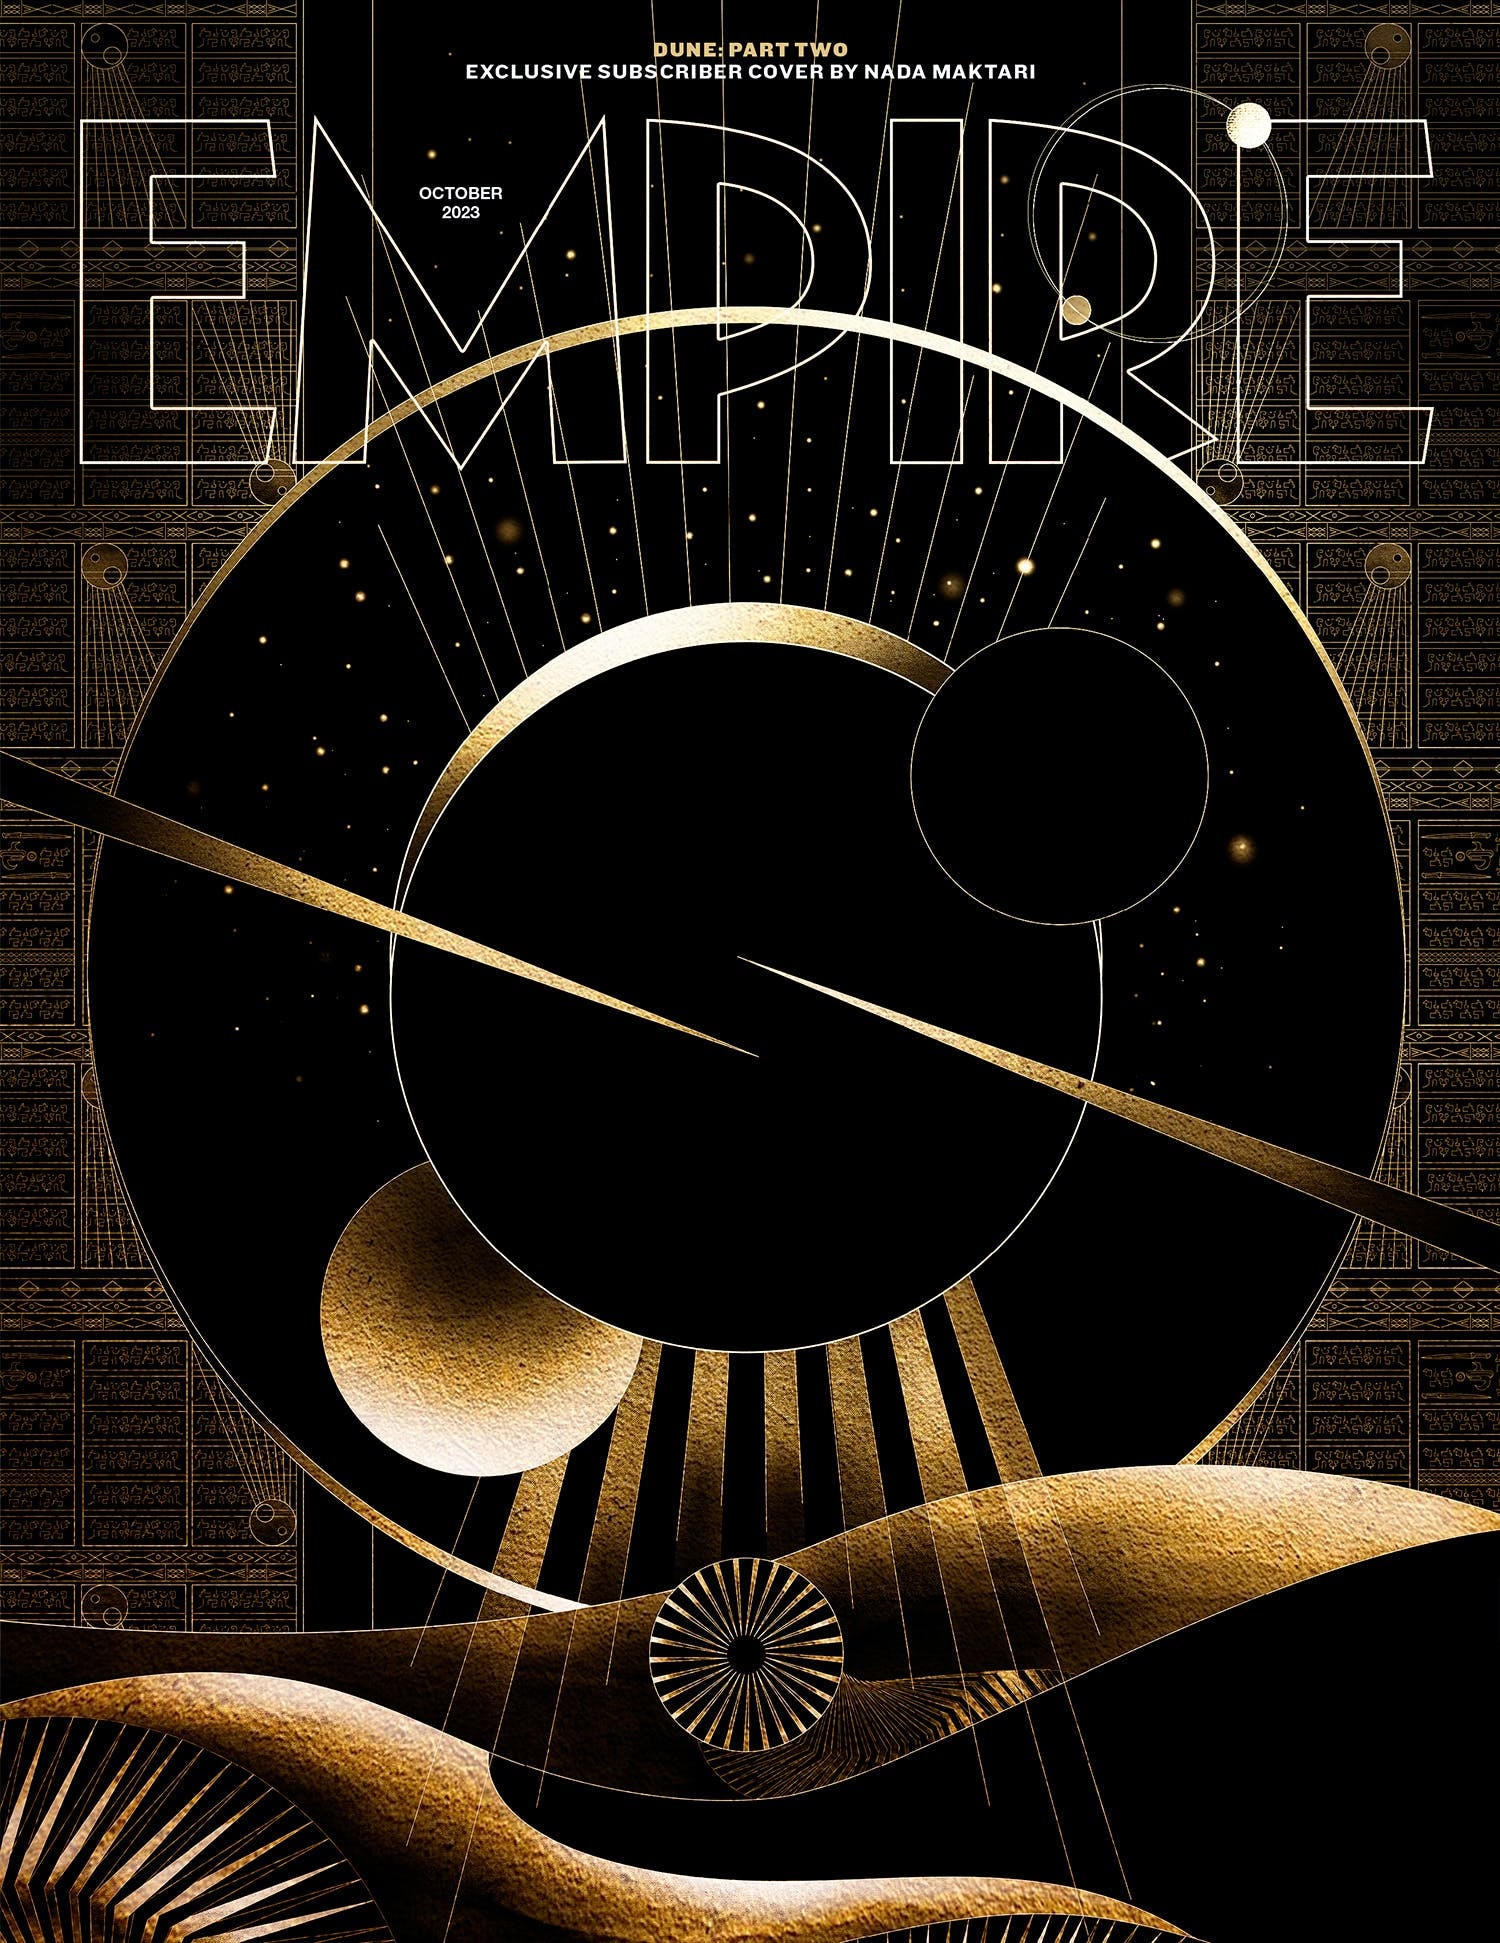 dune-part-two-empire-magazine-cover-subscriber.jpg